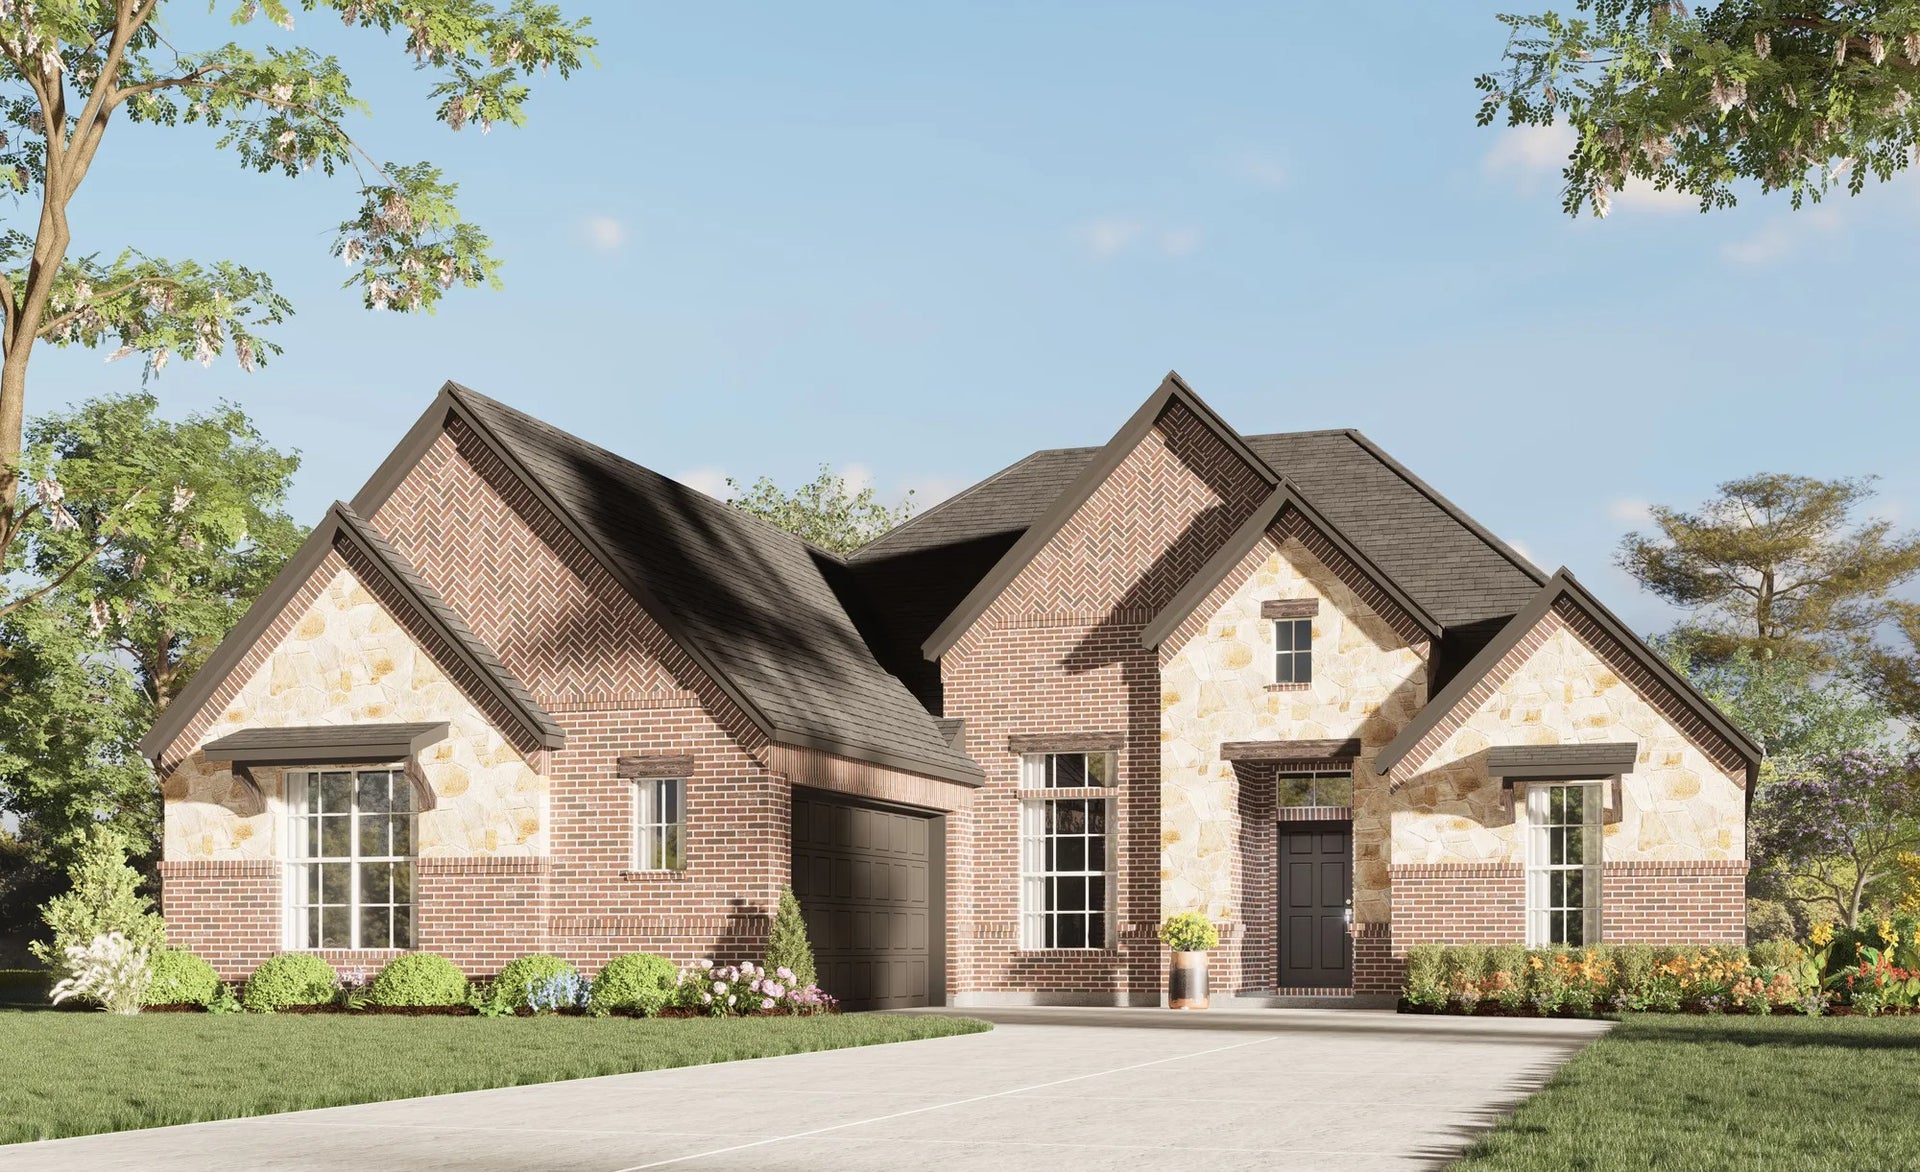 2370 C Stone. Concept 2370 Home with 4 Bedrooms